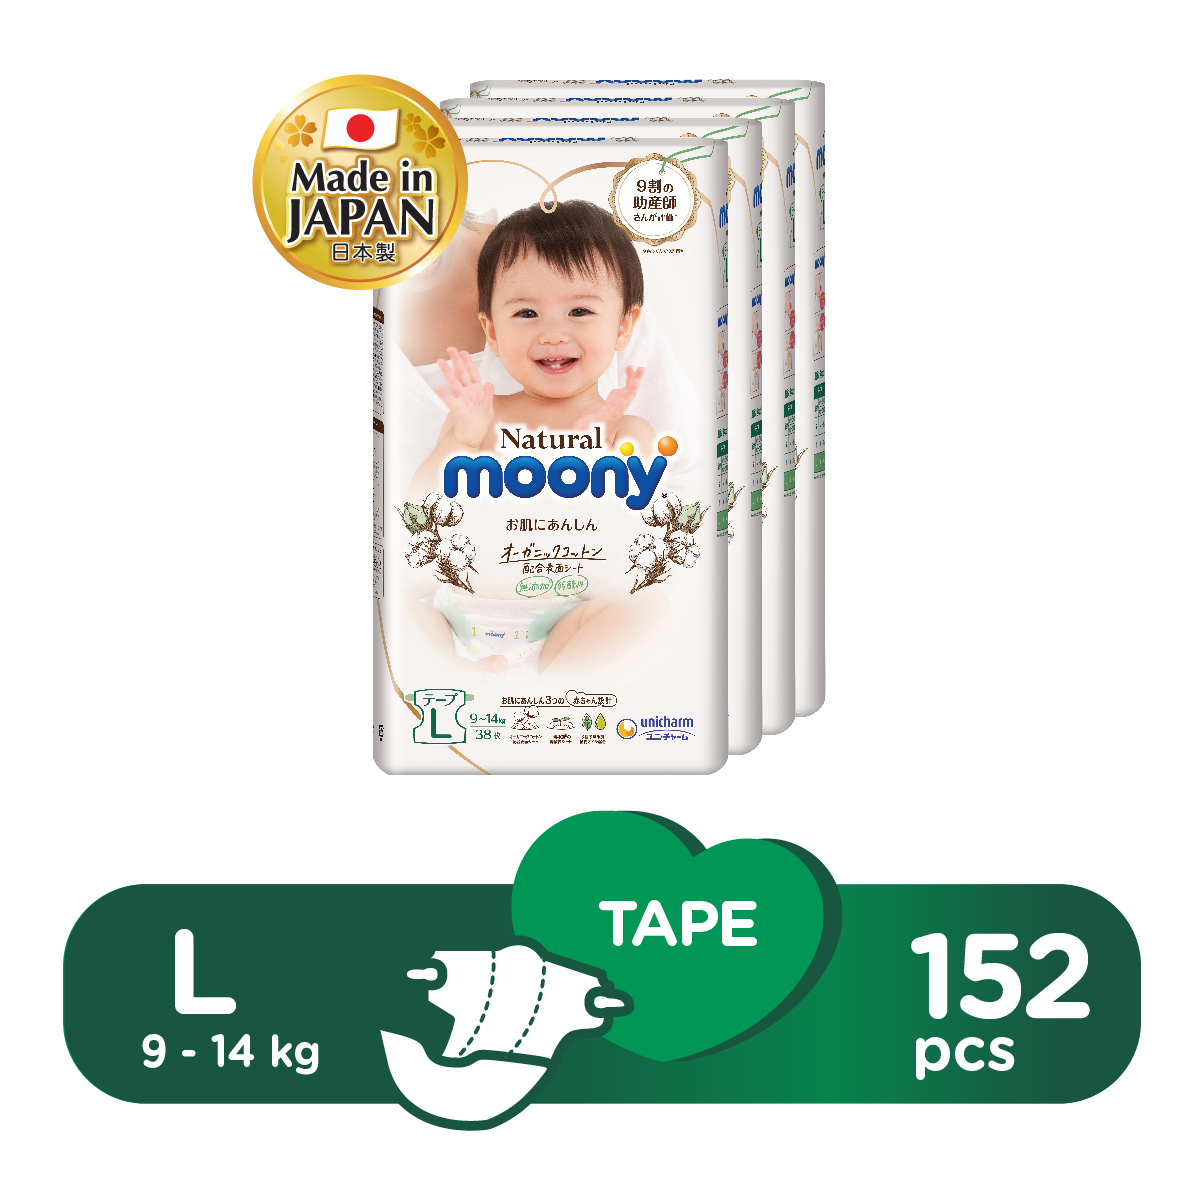 Moony Natural Baby Diapers (Tape) Large (9-14kg) - 152 pcs (4 packs)